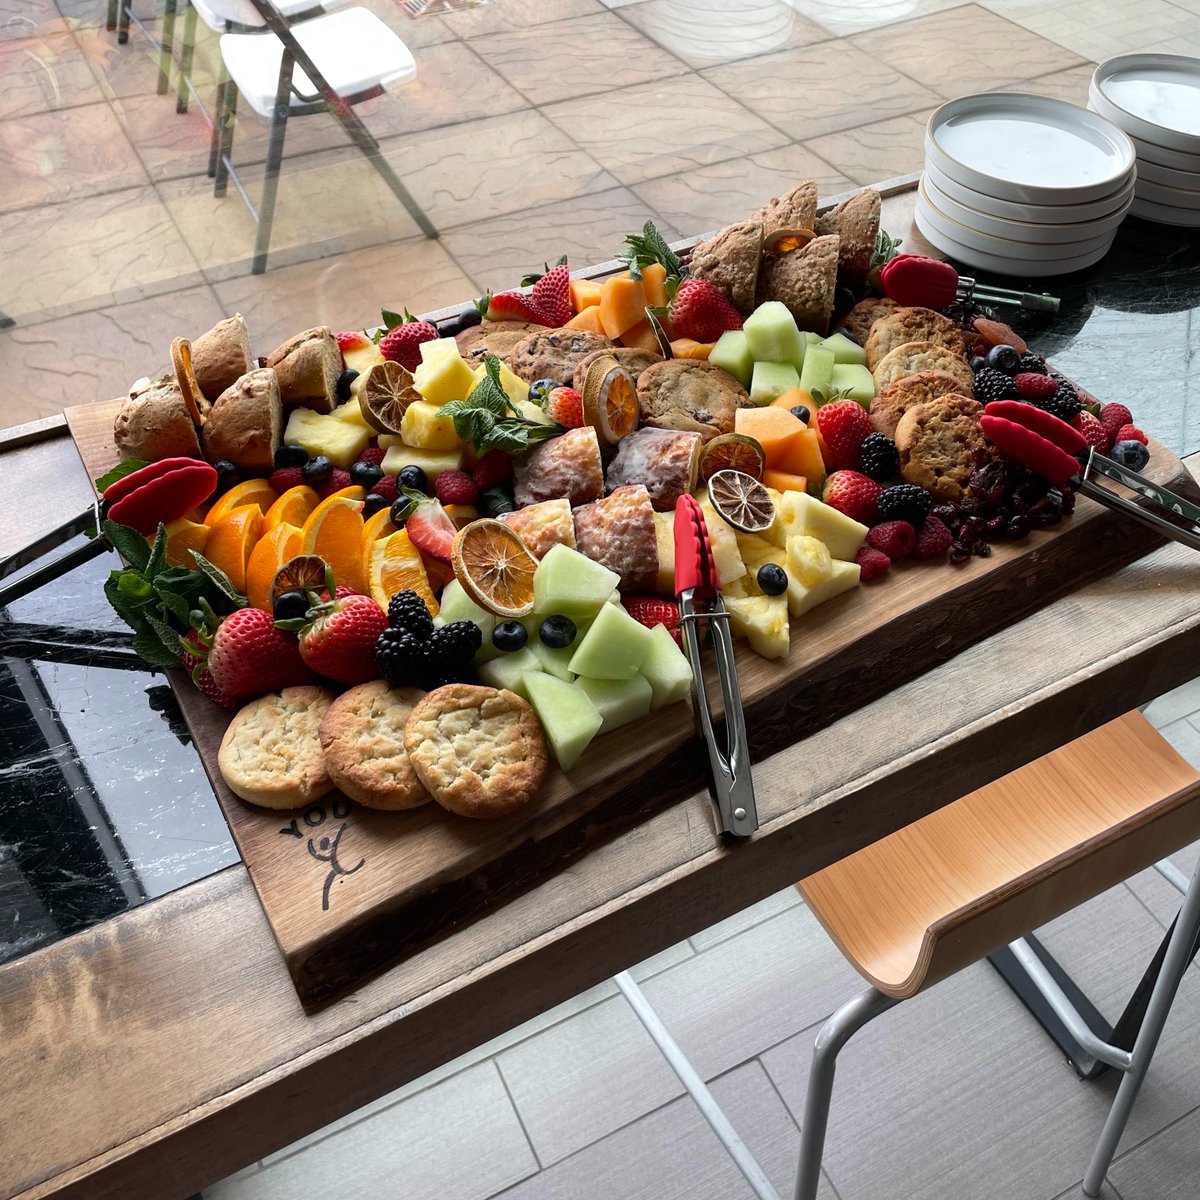 Searching for catering for your next event? Look no further! Let us create a custom menu for your meeting, corporate retreat, wedding or baby shower, family reunion, or whatever you plan. View our catering options and get a quote: bit.ly/43SWeND #ldnont #socialgoodcafe